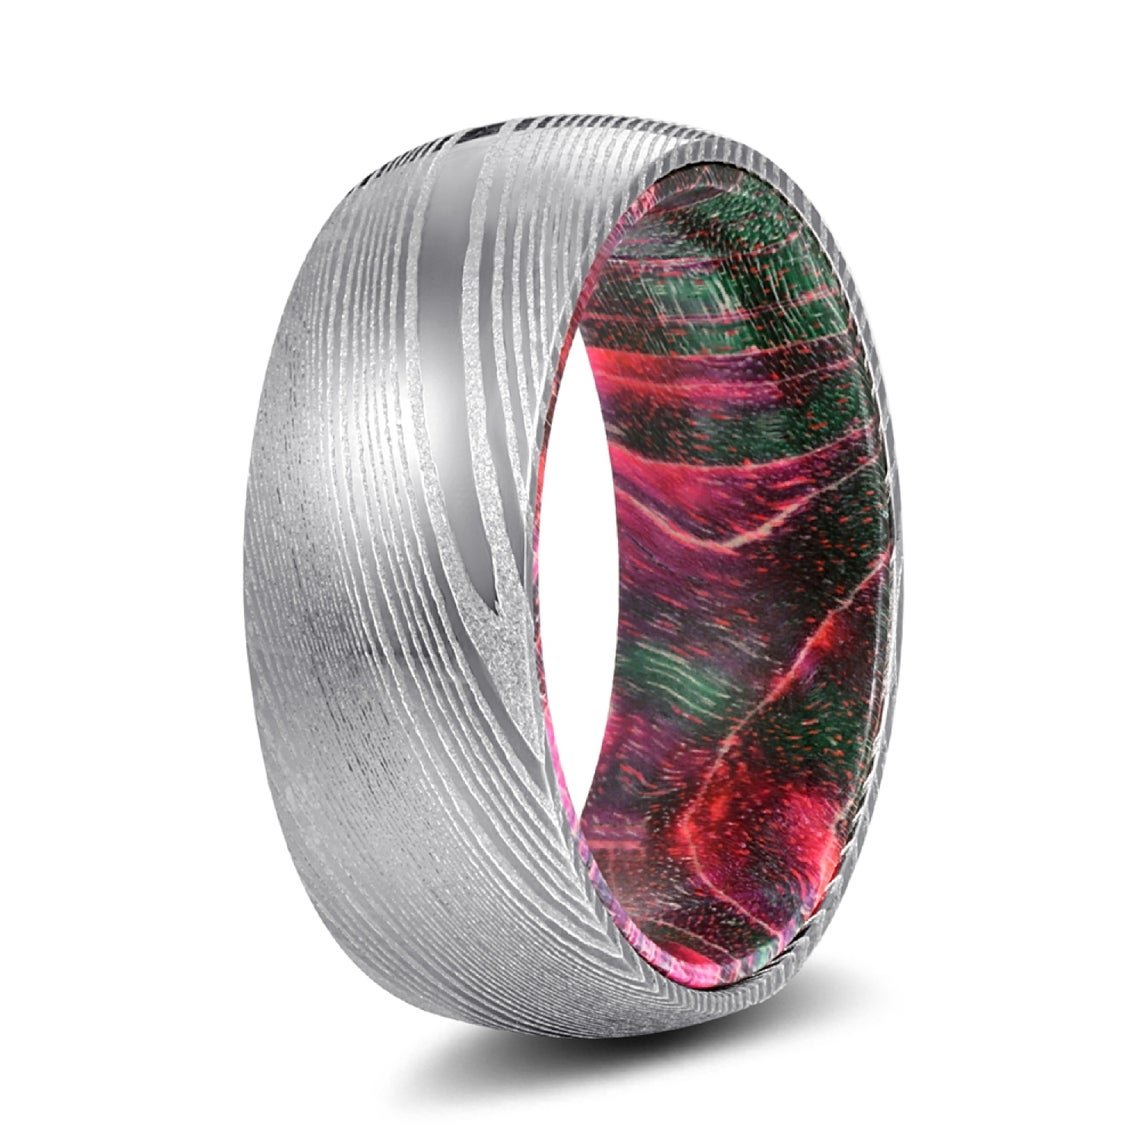 Xmas Steel - Damascus Steel with Green and Red Elder Wood Ring